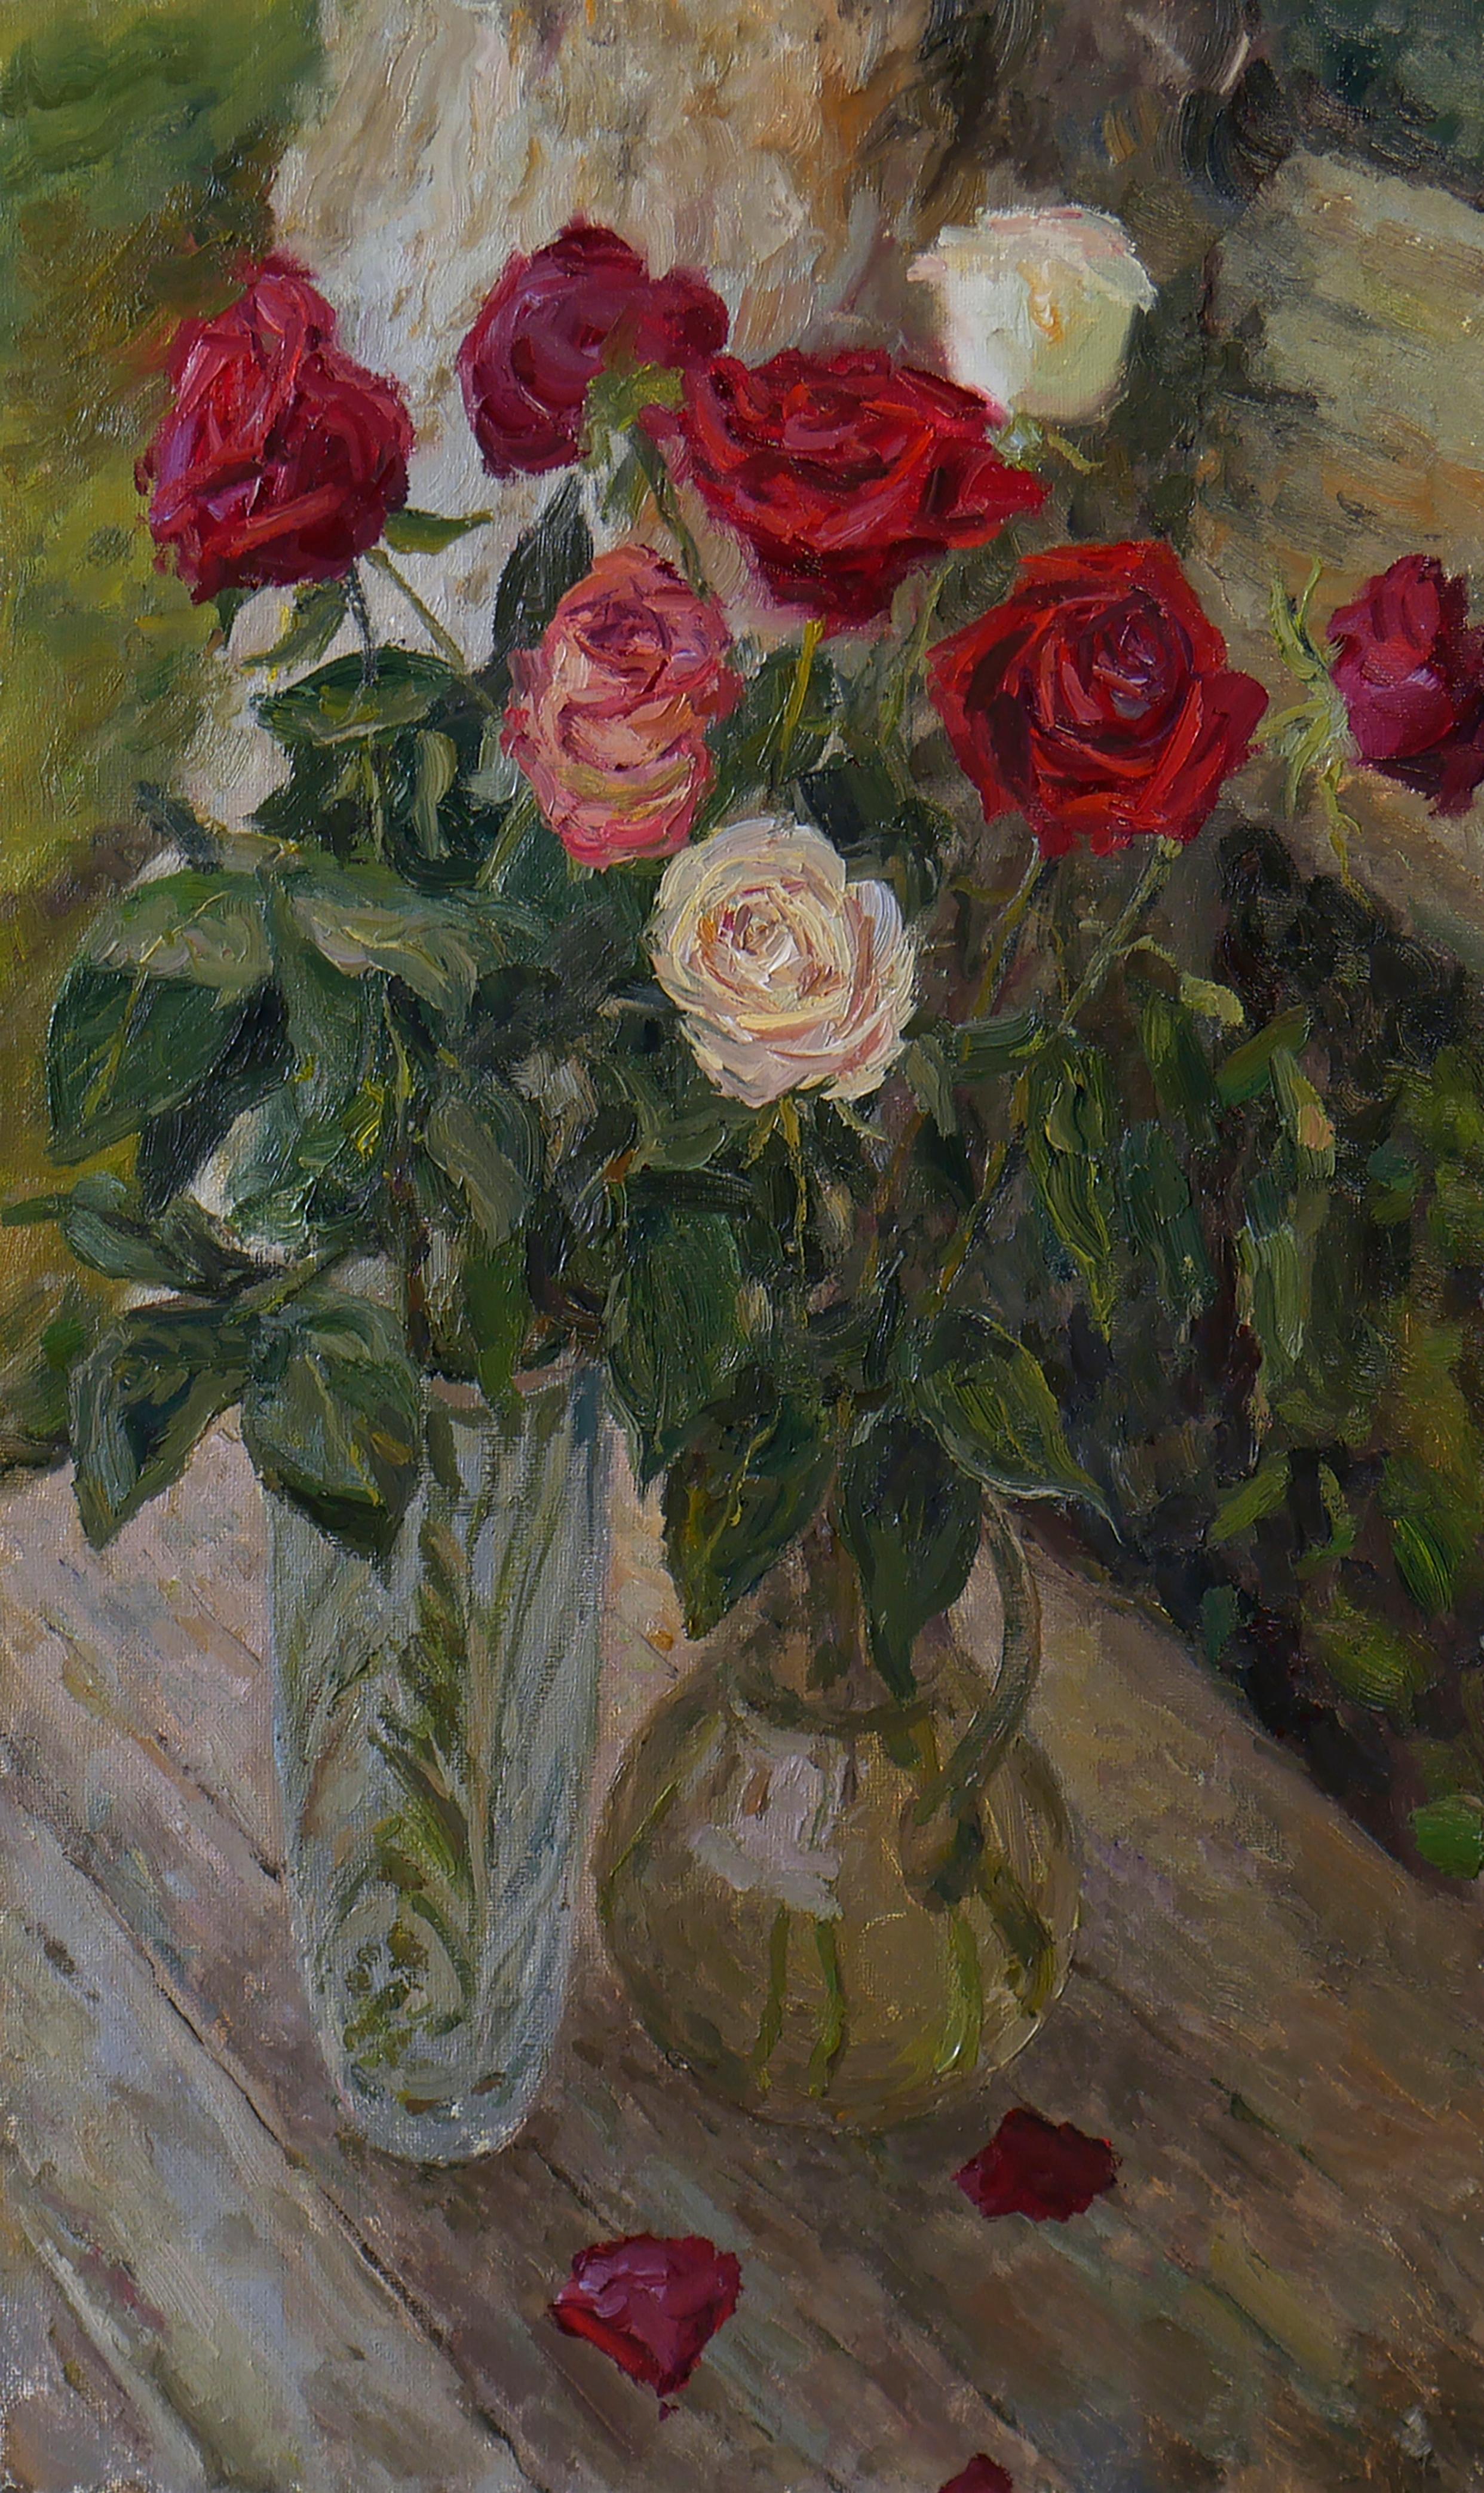 Roses In Vases - still life painting